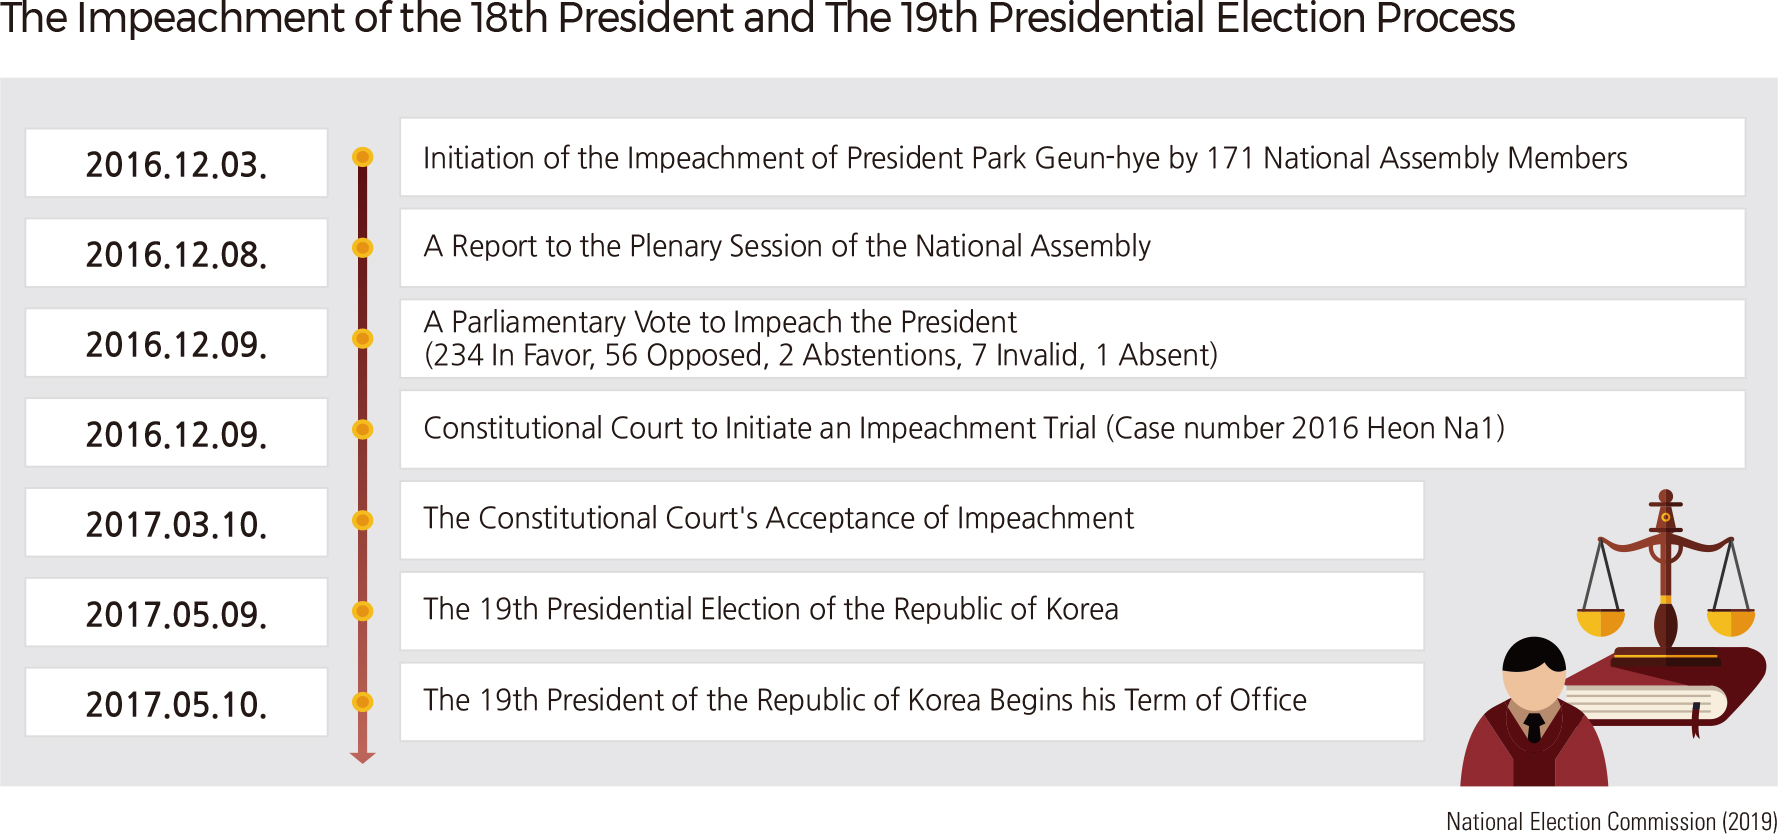 The Impeachment of the 18th President and The 19th Presidential Election Process